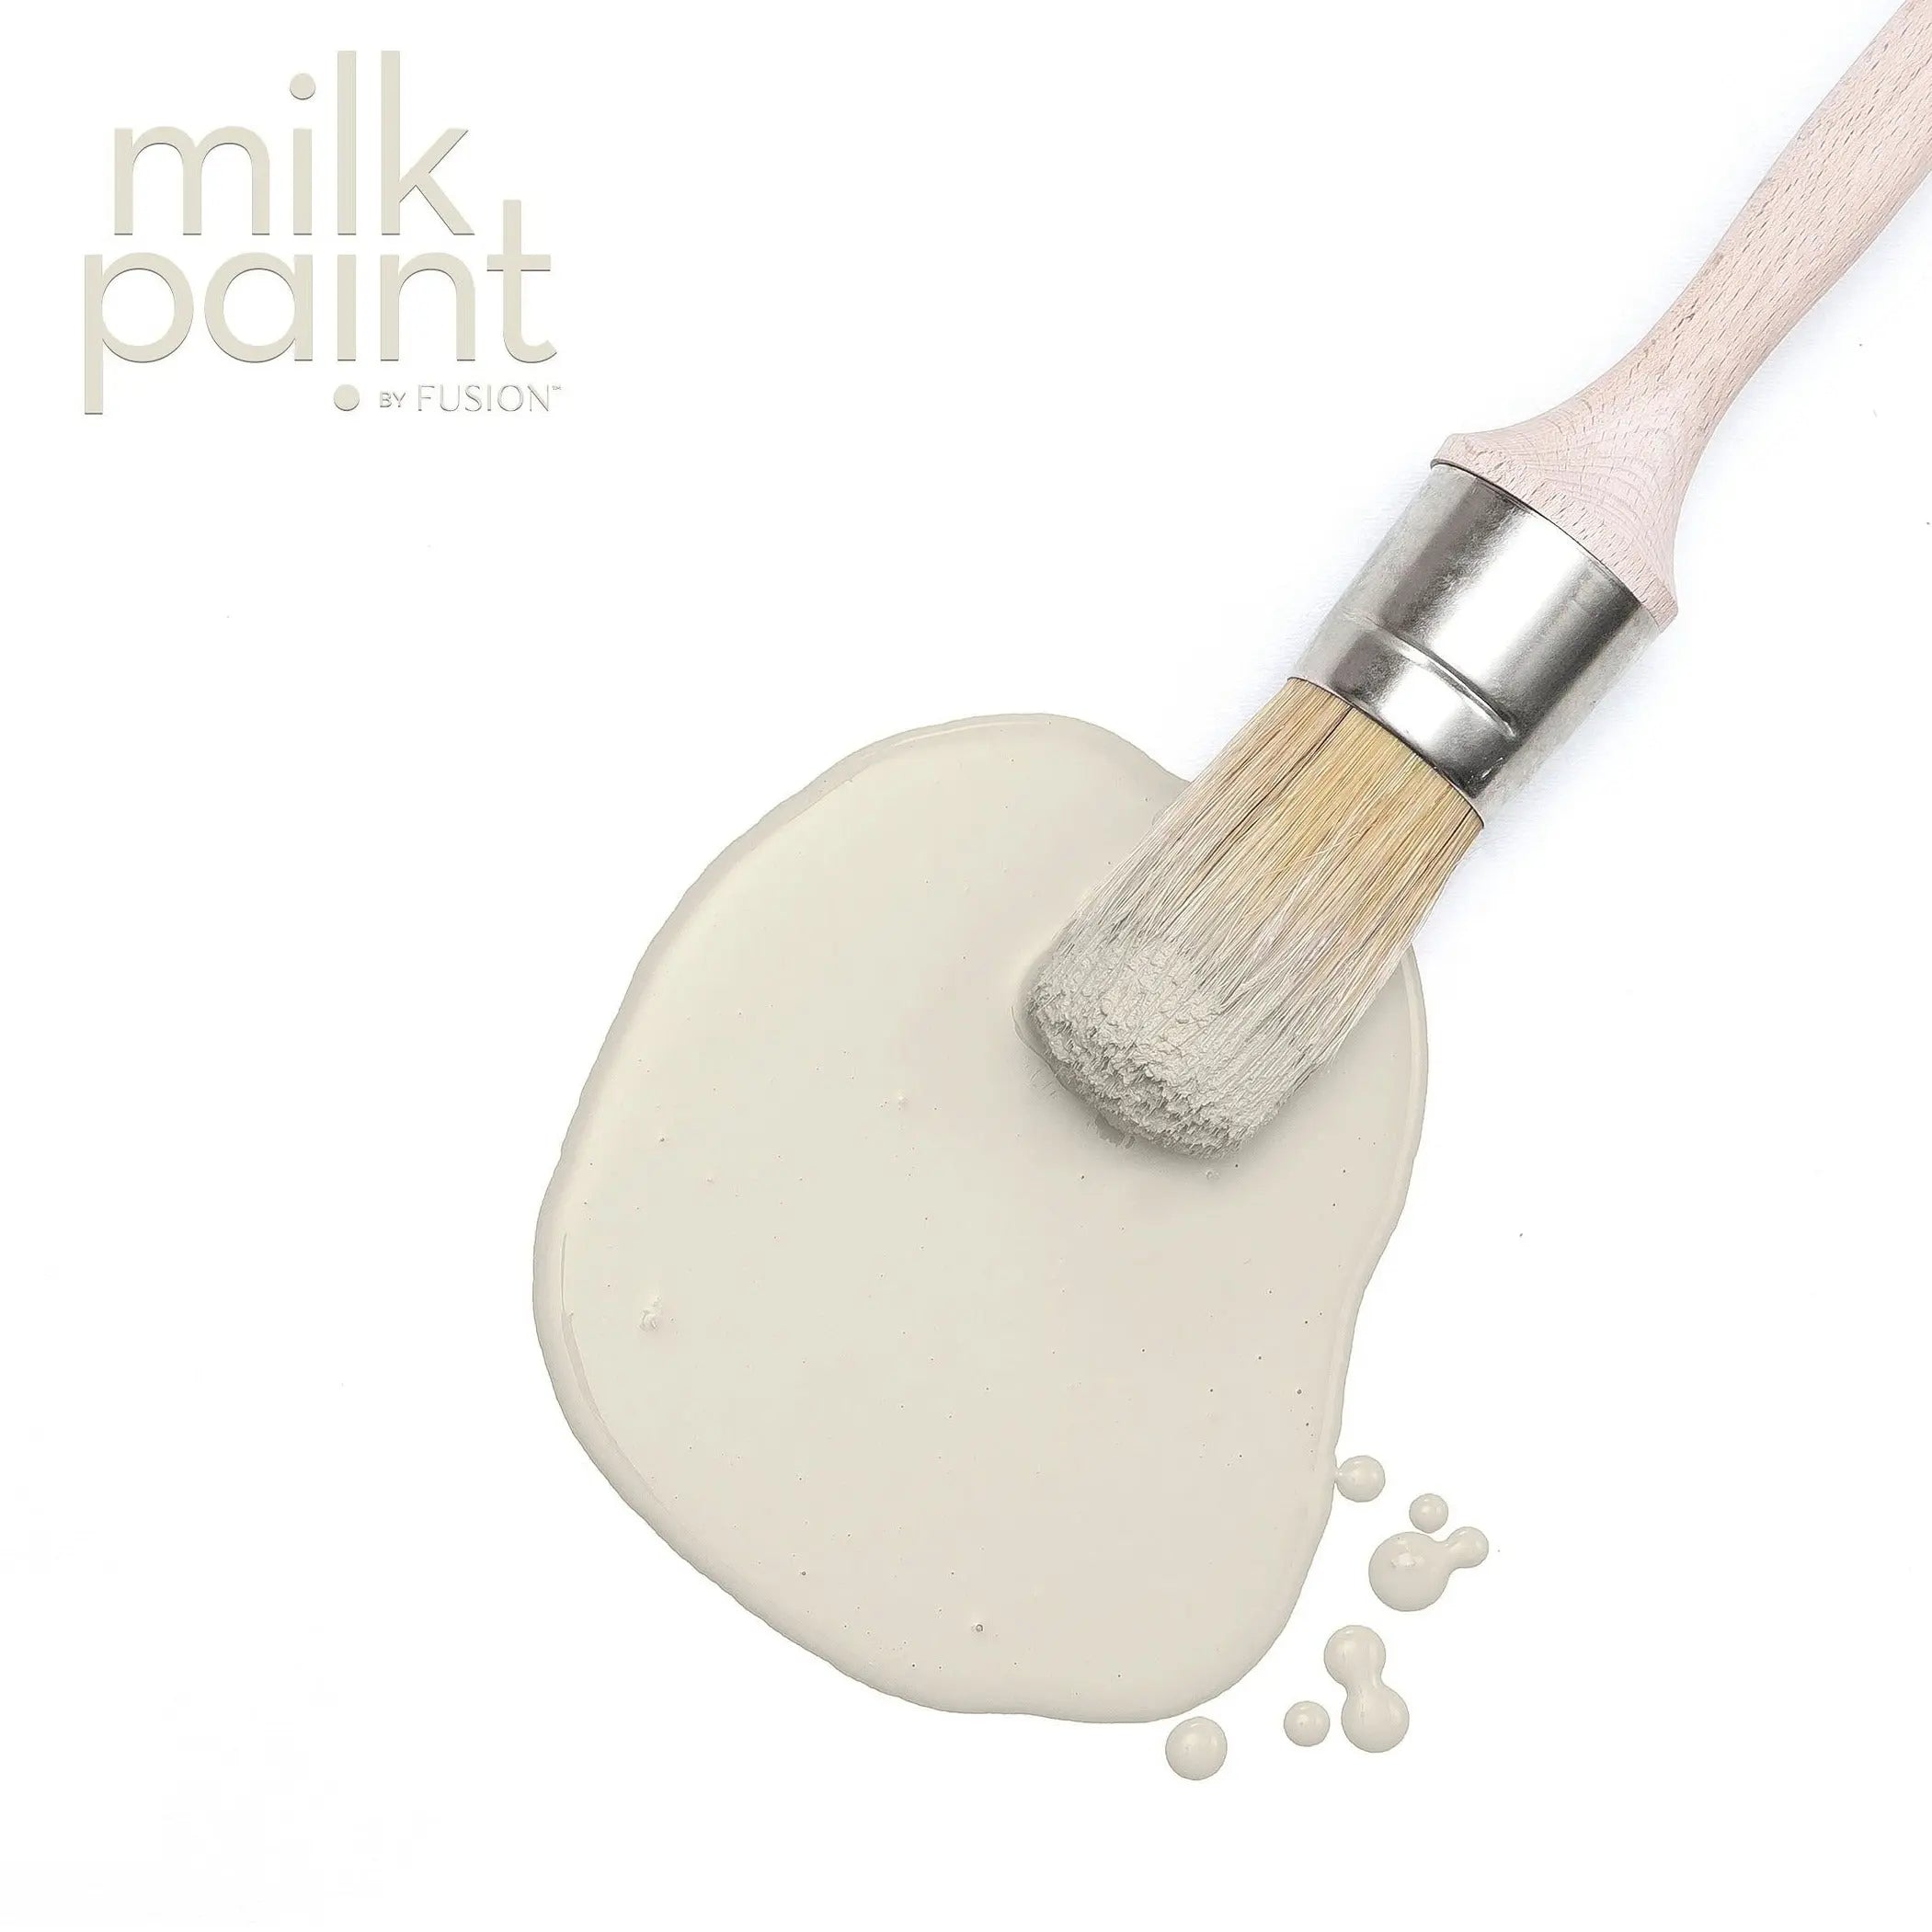 Fusion Milk Paint in Toasted Coconut - Home Smith